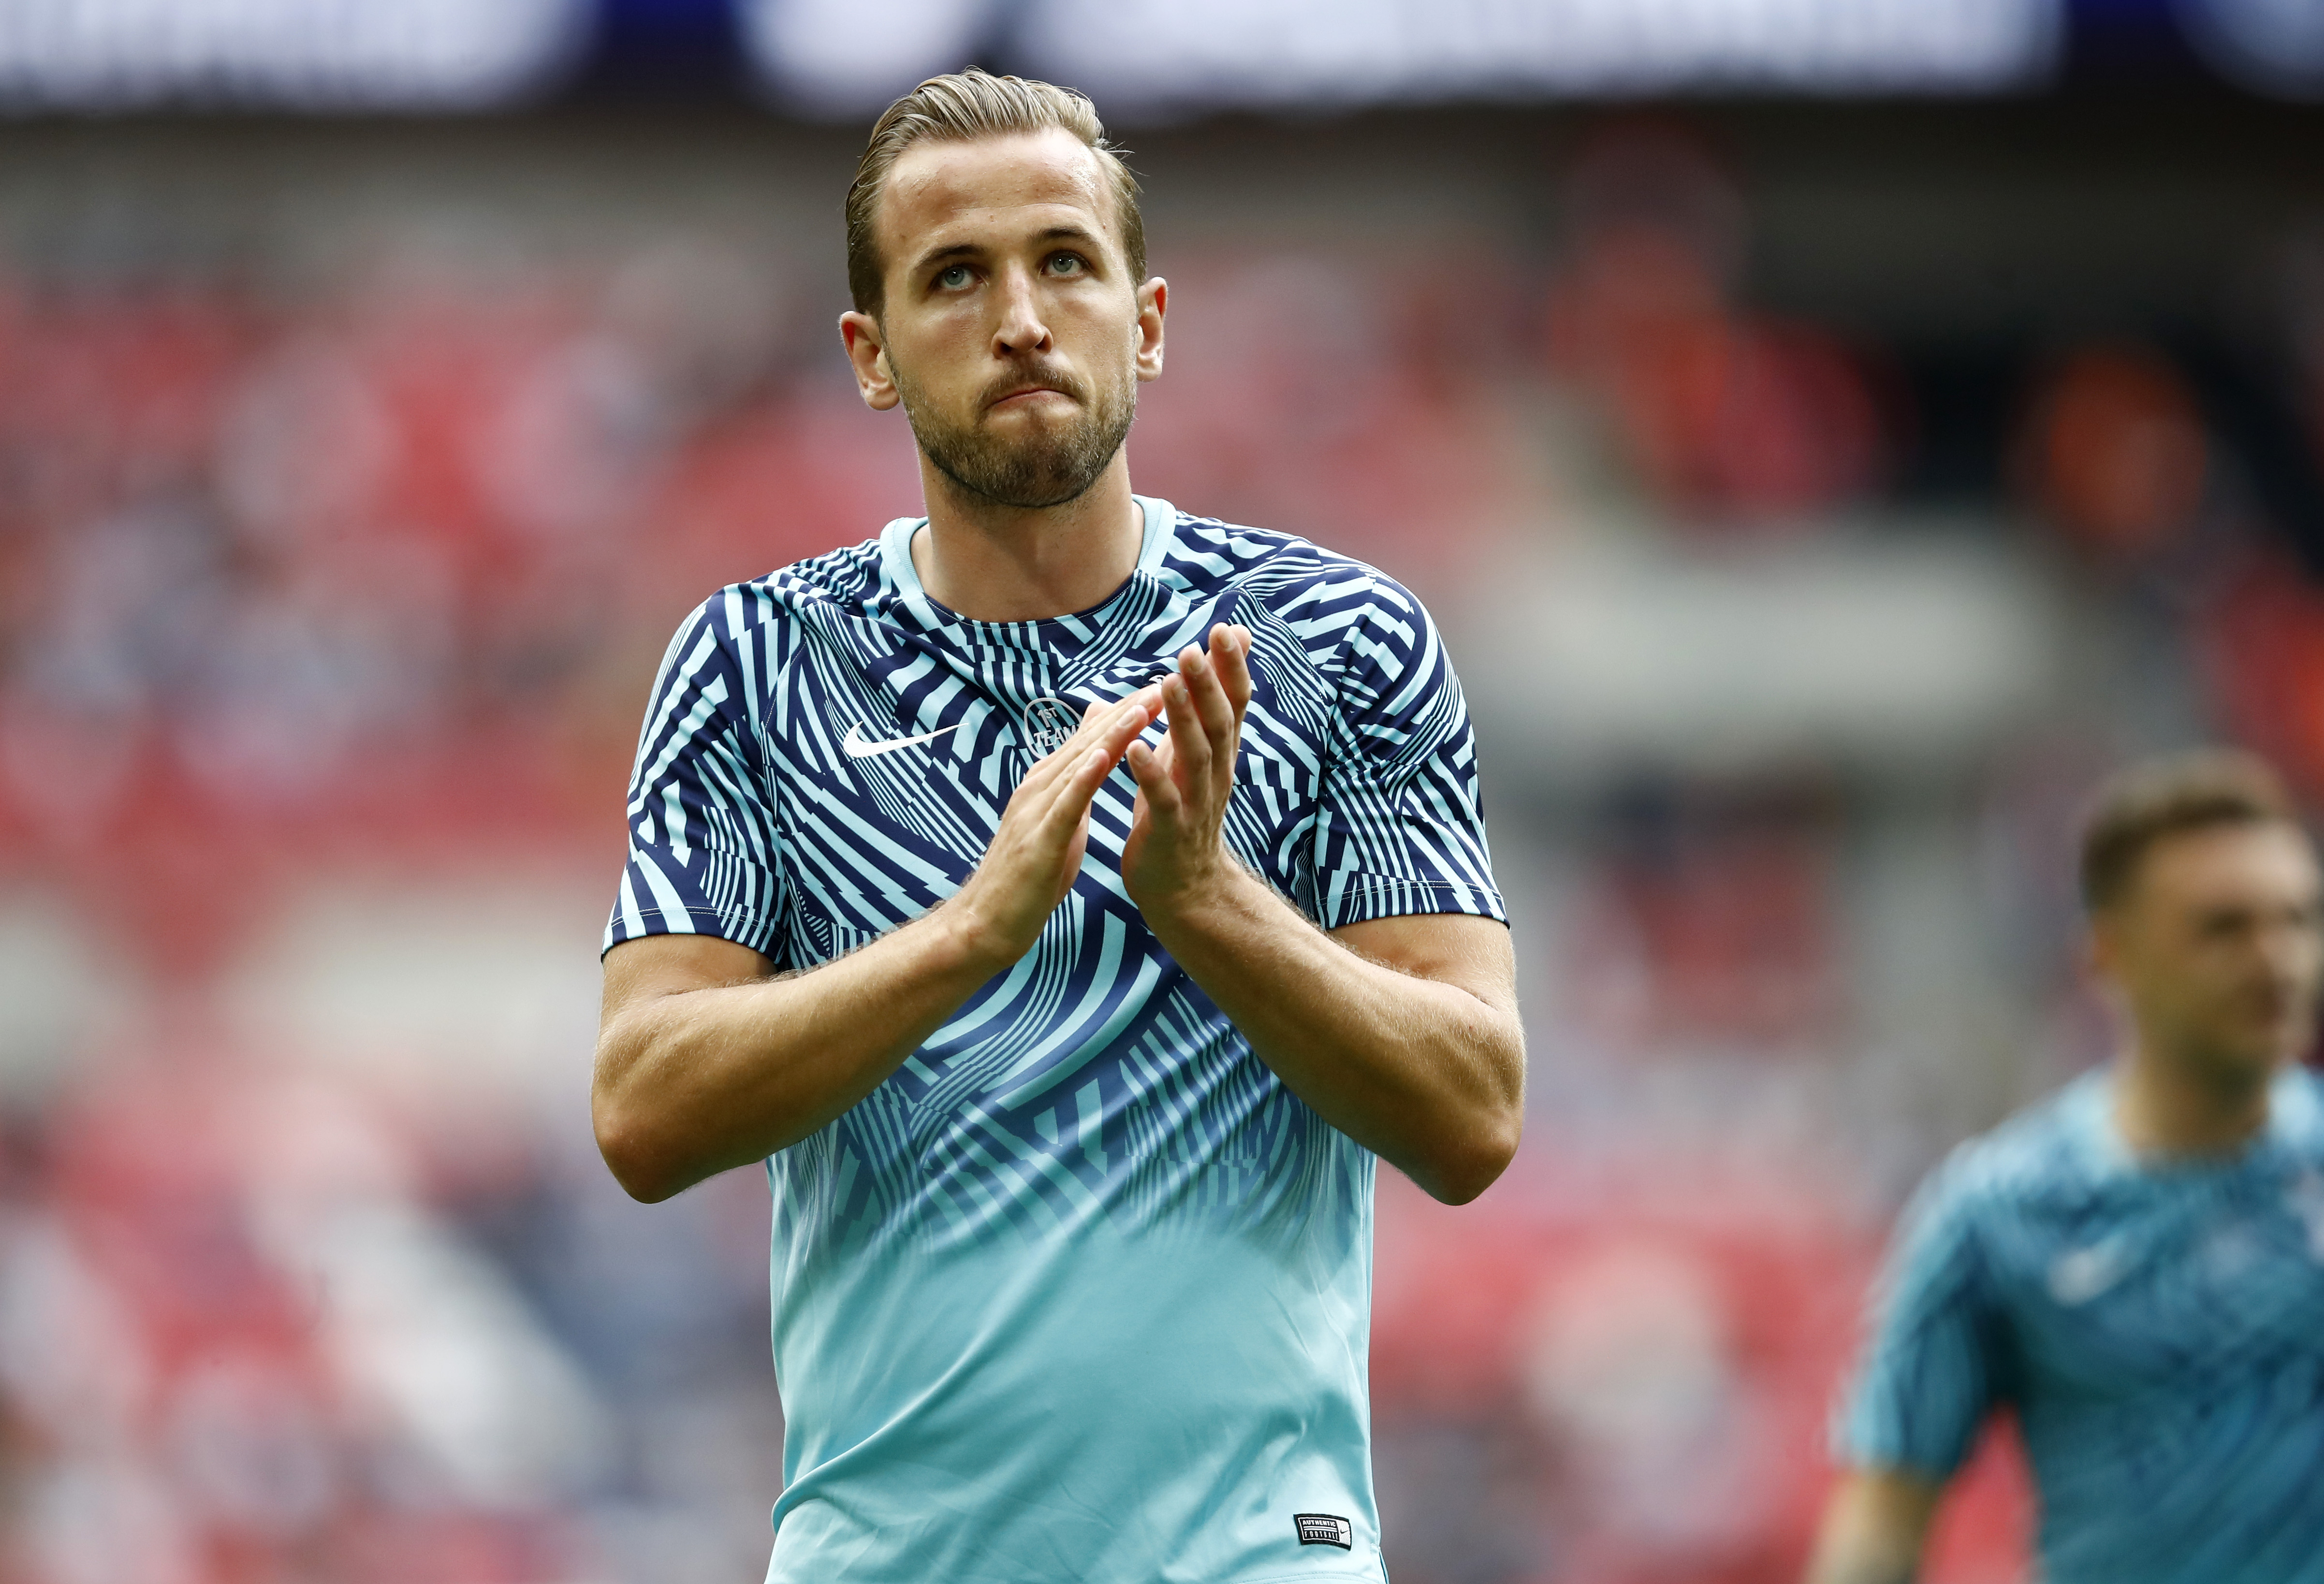 Harry Kane will have a point to prove to his doubters when he faces Inter Milan. (Photo courtesy: AFP/Getty)